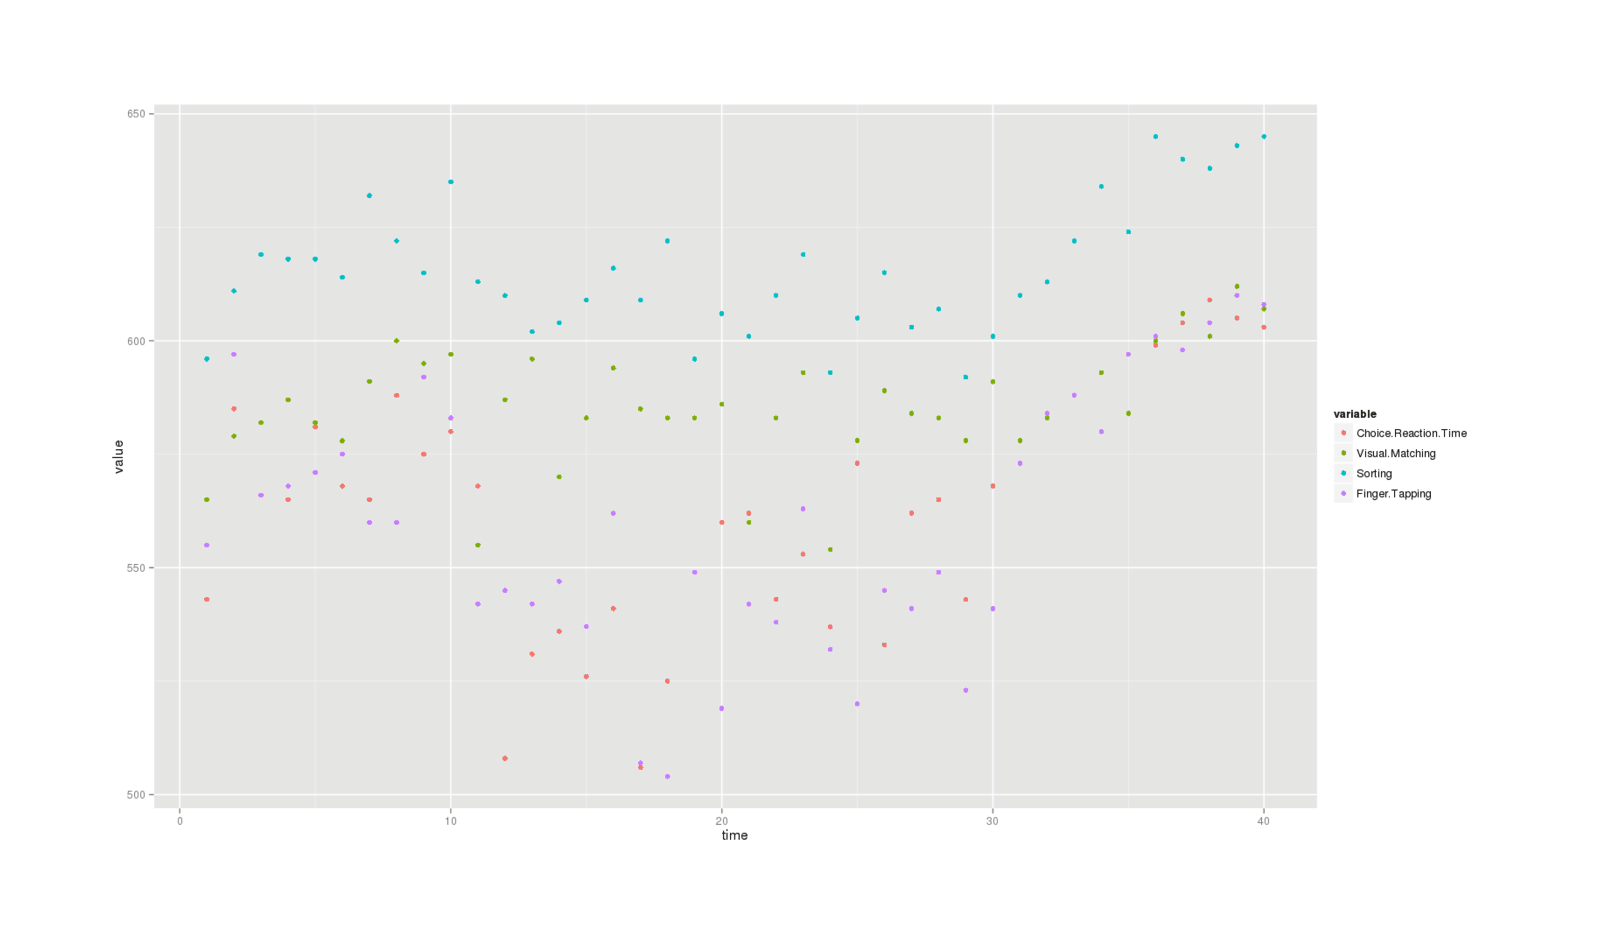 ggplot(df.melt, aes(x=time, y=value, colour=variable)) + geom_point()